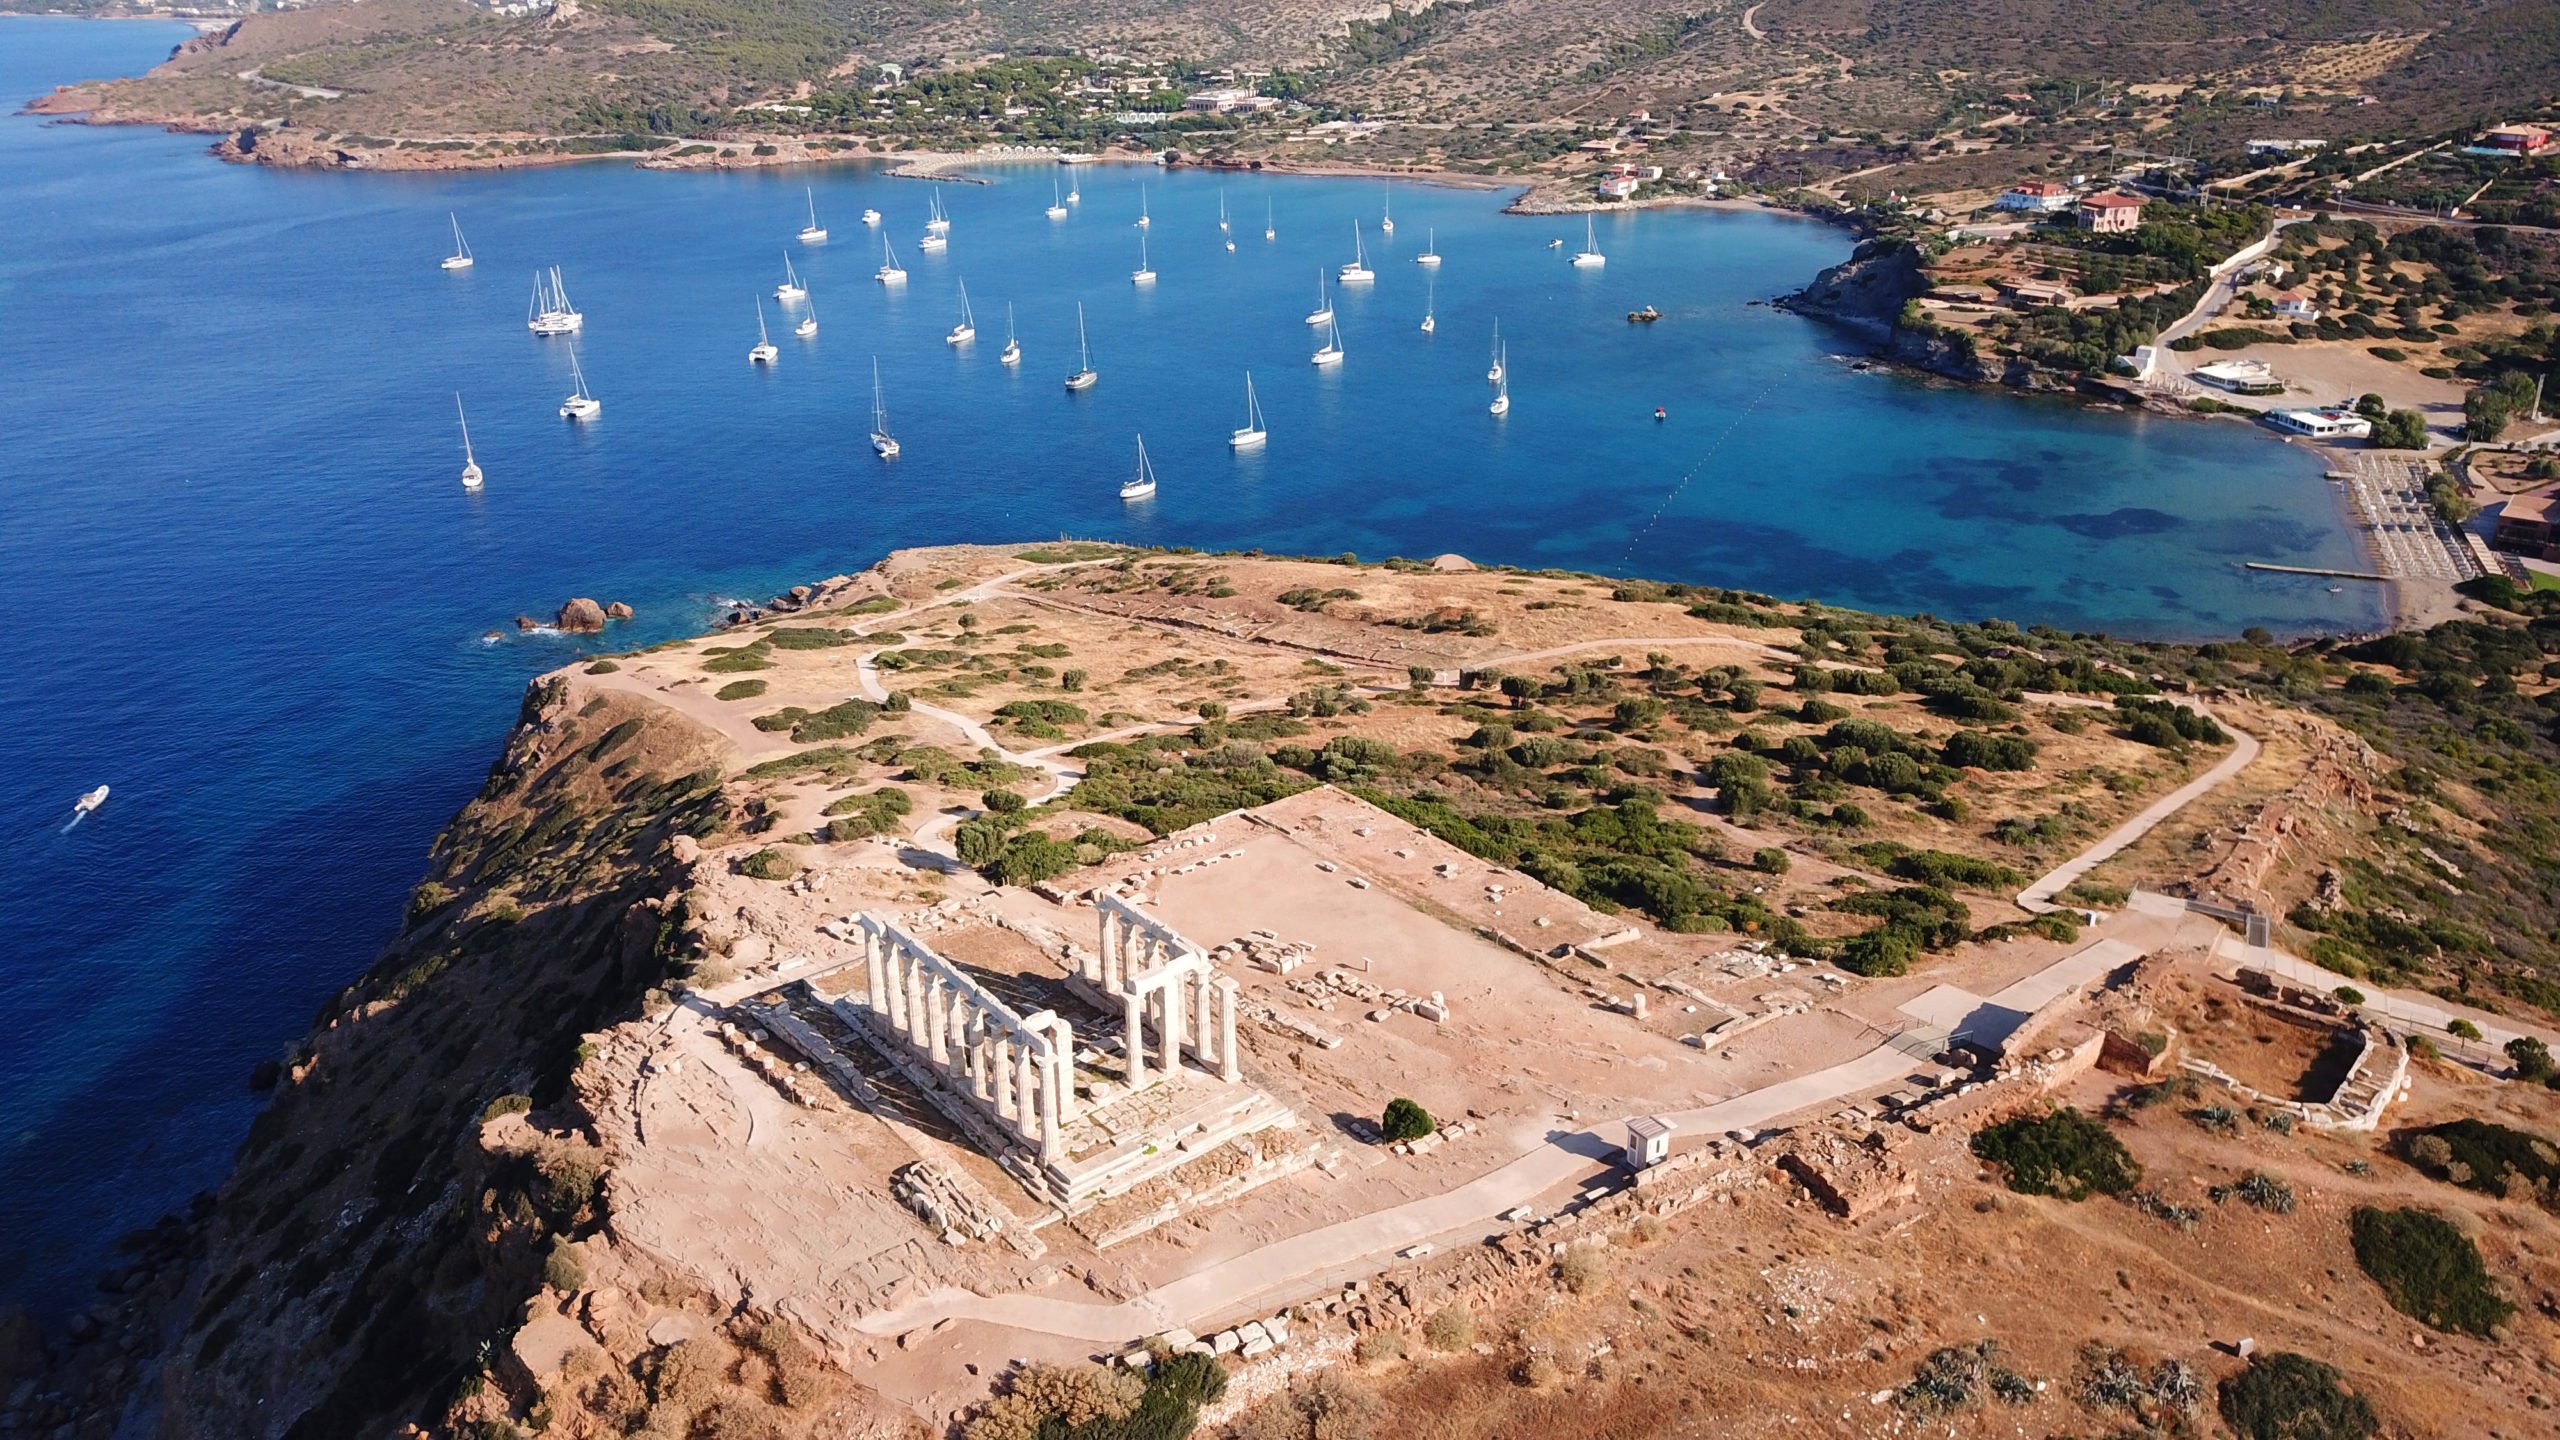 Enjoy The Beautiful Views Over The Aegean Sea On The Cape Sounio Half Day Tour From Athens